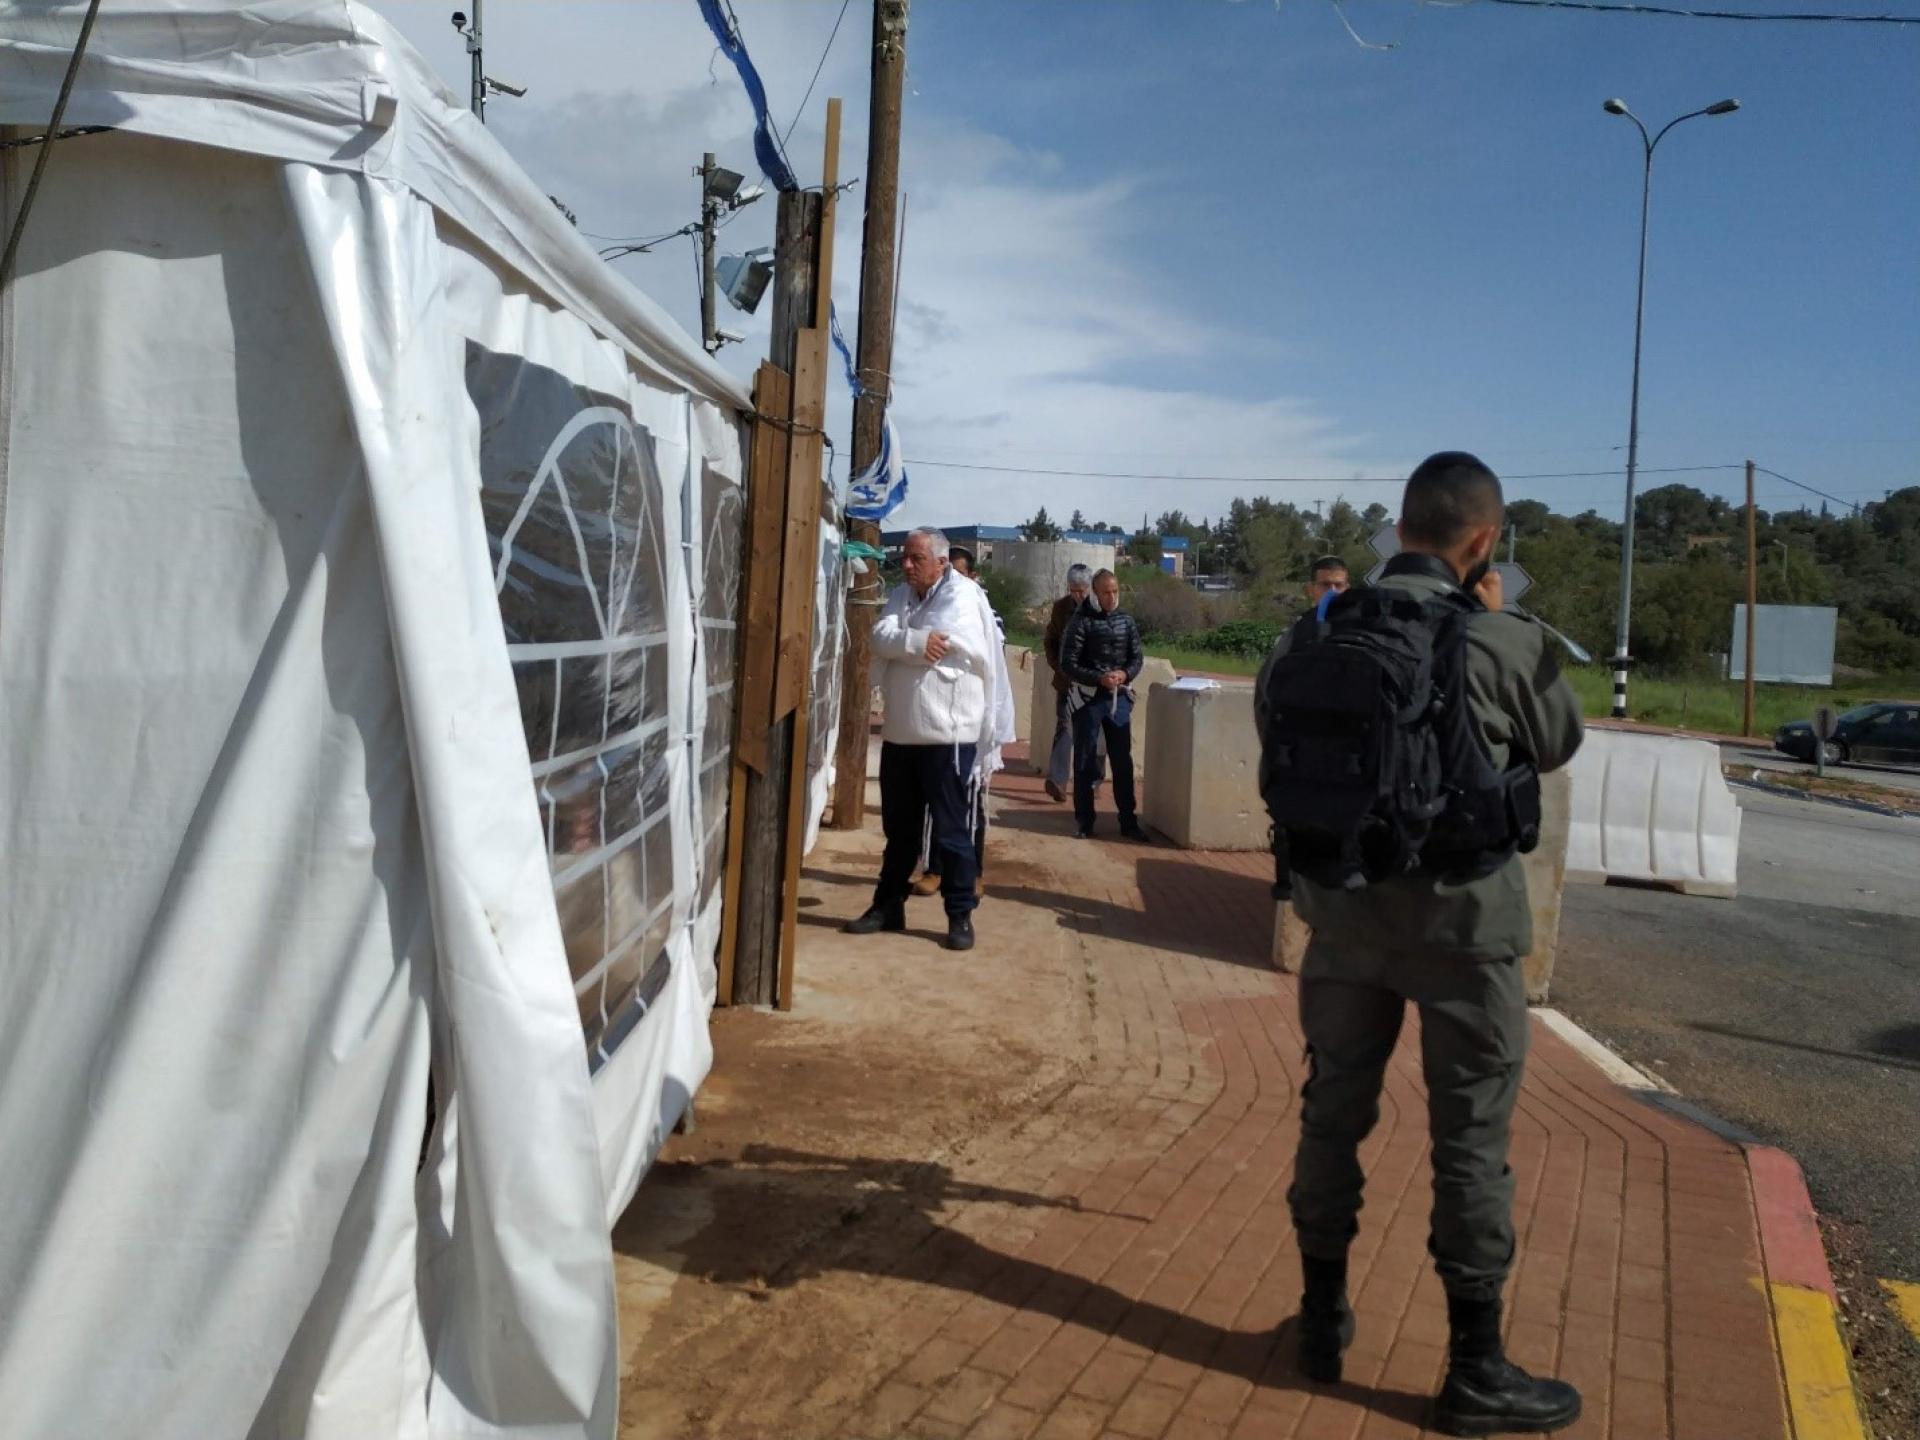 Halameesh Junction: a soldier guarding the entrance of a provisional synagogue tent